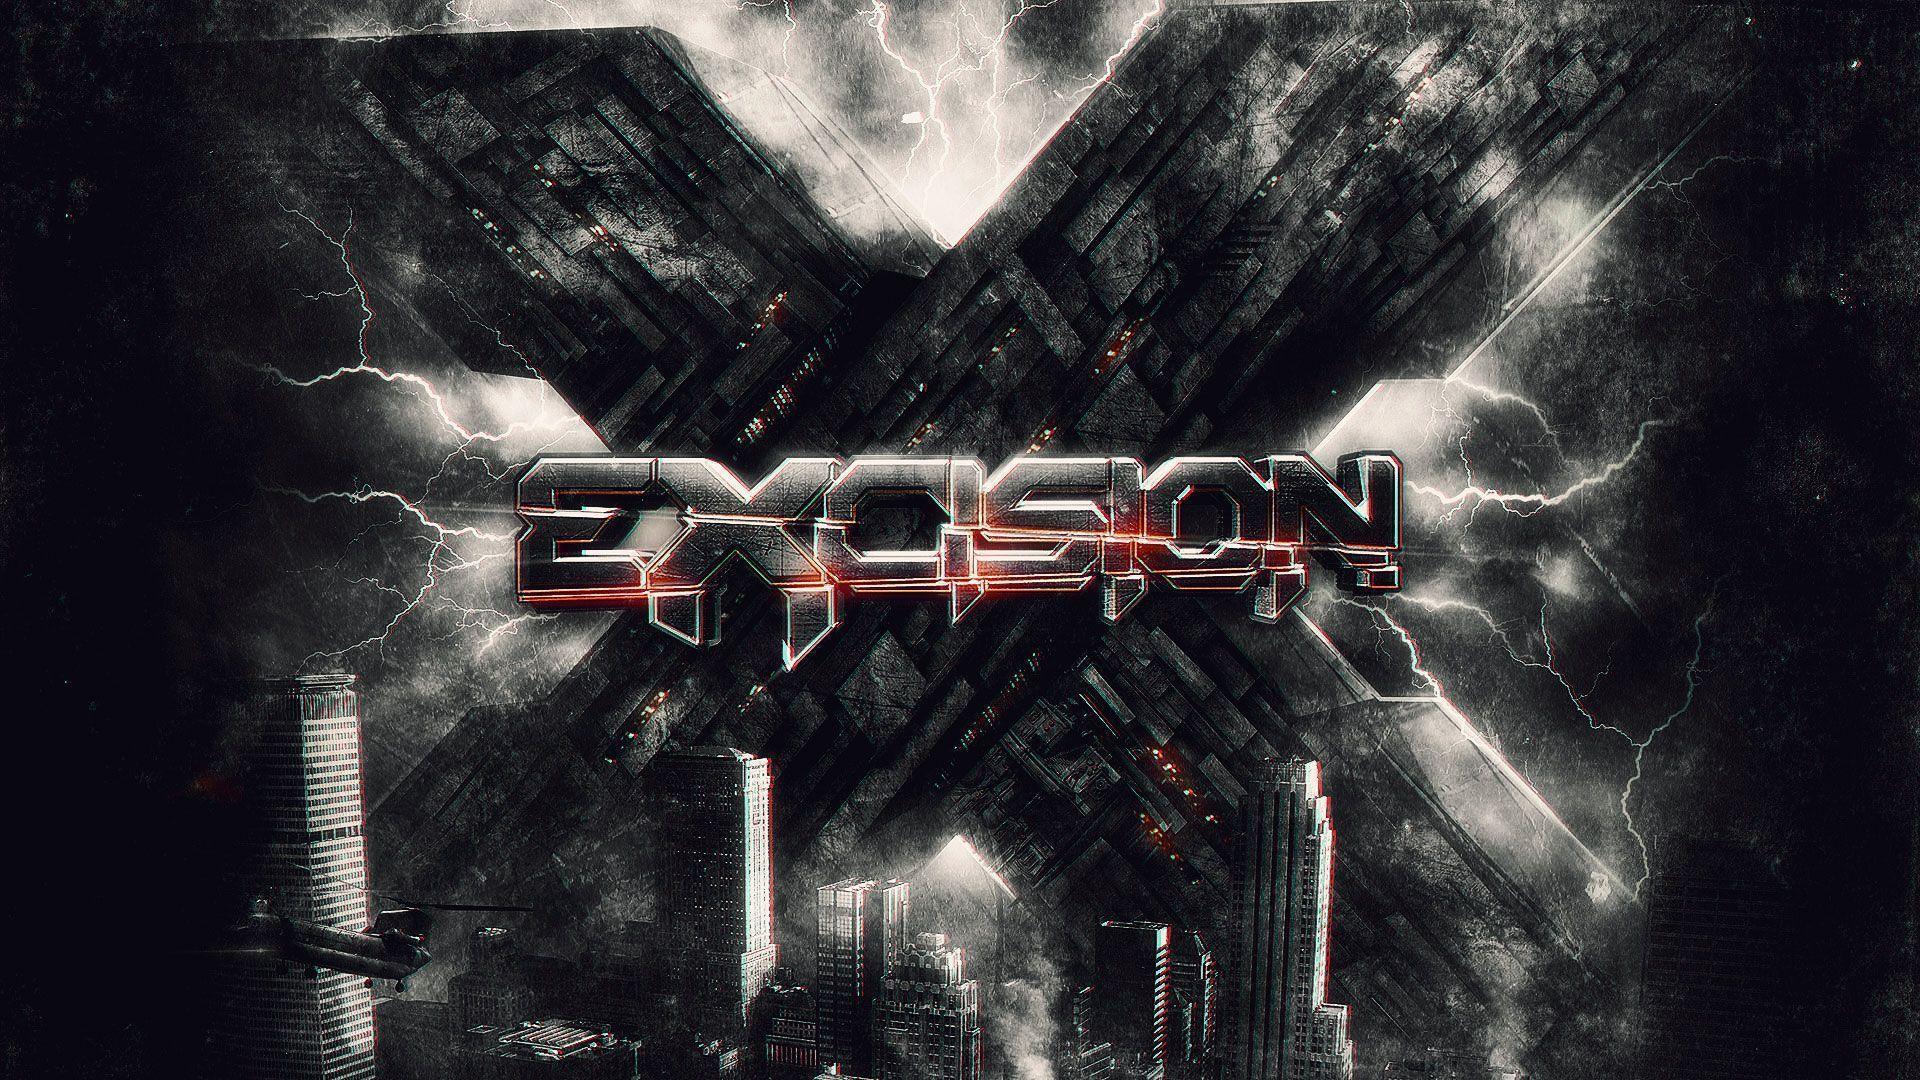 Hey it Has Been A While Since I Posted Wallpaper Edits so Here are Two  Edits I am Still a Loyal Excision Fan and Will Be Forever  rExcision